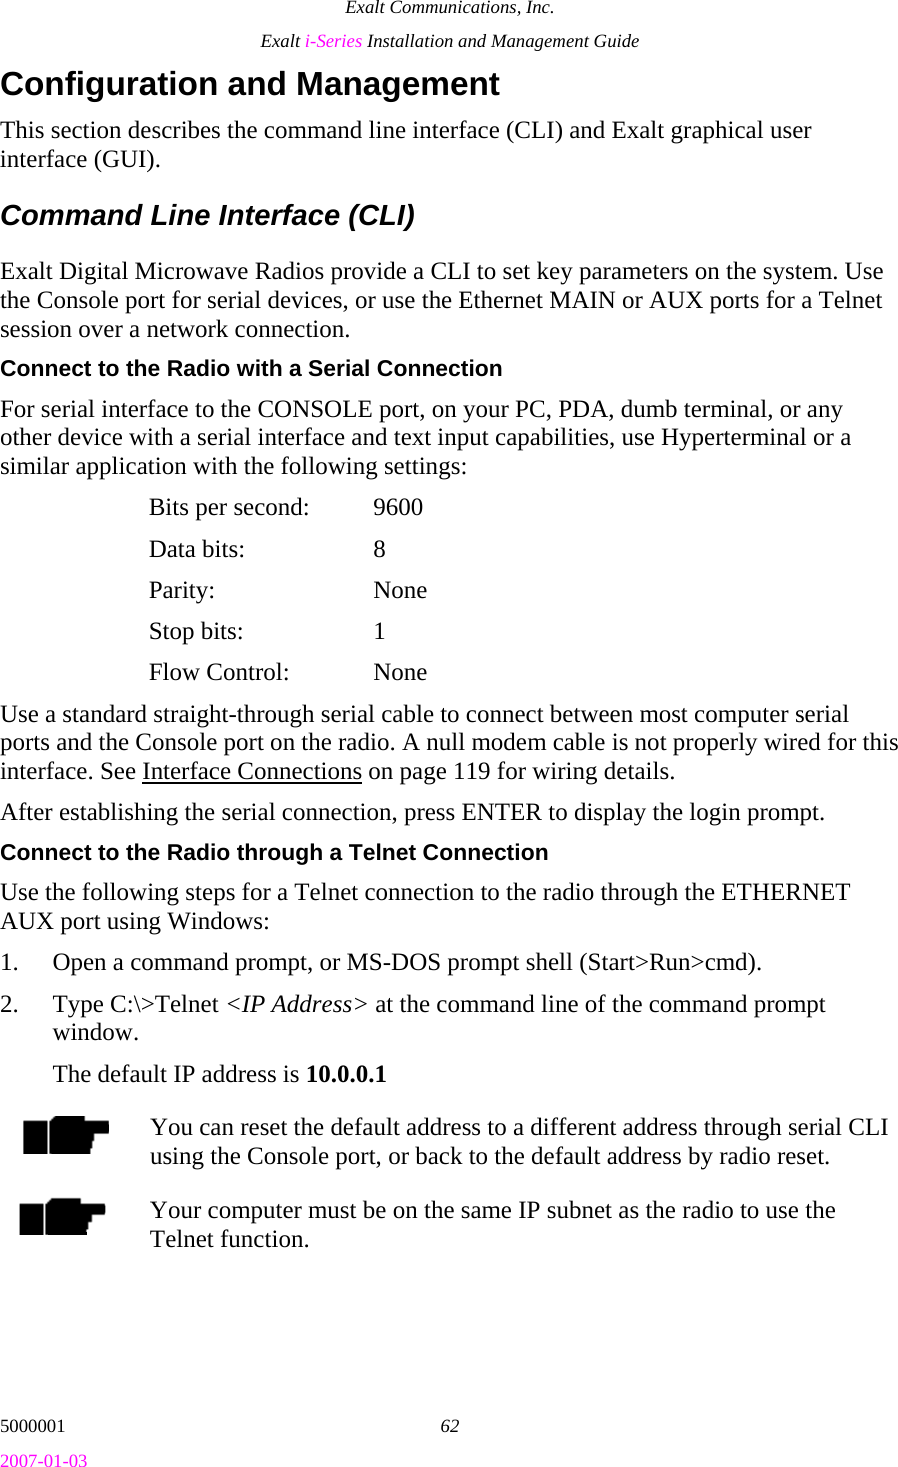 Exalt Communications, Inc. Exalt i-Series Installation and Management Guide 5000001  62 2007-01-03 Configuration and Management This section describes the command line interface (CLI) and Exalt graphical user interface (GUI). Command Line Interface (CLI) Exalt Digital Microwave Radios provide a CLI to set key parameters on the system. Use the Console port for serial devices, or use the Ethernet MAIN or AUX ports for a Telnet session over a network connection. Connect to the Radio with a Serial Connection For serial interface to the CONSOLE port, on your PC, PDA, dumb terminal, or any other device with a serial interface and text input capabilities, use Hyperterminal or a similar application with the following settings:   Bits per second:  9600  Data bits: 8  Parity:  None  Stop bits: 1  Flow Control: None Use a standard straight-through serial cable to connect between most computer serial ports and the Console port on the radio. A null modem cable is not properly wired for this interface. See Interface Connections on page 119 for wiring details. After establishing the serial connection, press ENTER to display the login prompt. Connect to the Radio through a Telnet Connection Use the following steps for a Telnet connection to the radio through the ETHERNET AUX port using Windows: 1. Open a command prompt, or MS-DOS prompt shell (Start&gt;Run&gt;cmd). 2. Type C:\&gt;Telnet &lt;IP Address&gt; at the command line of the command prompt window. The default IP address is 10.0.0.1 You can reset the default address to a different address through serial CLI using the Console port, or back to the default address by radio reset. Your computer must be on the same IP subnet as the radio to use the Telnet function. 